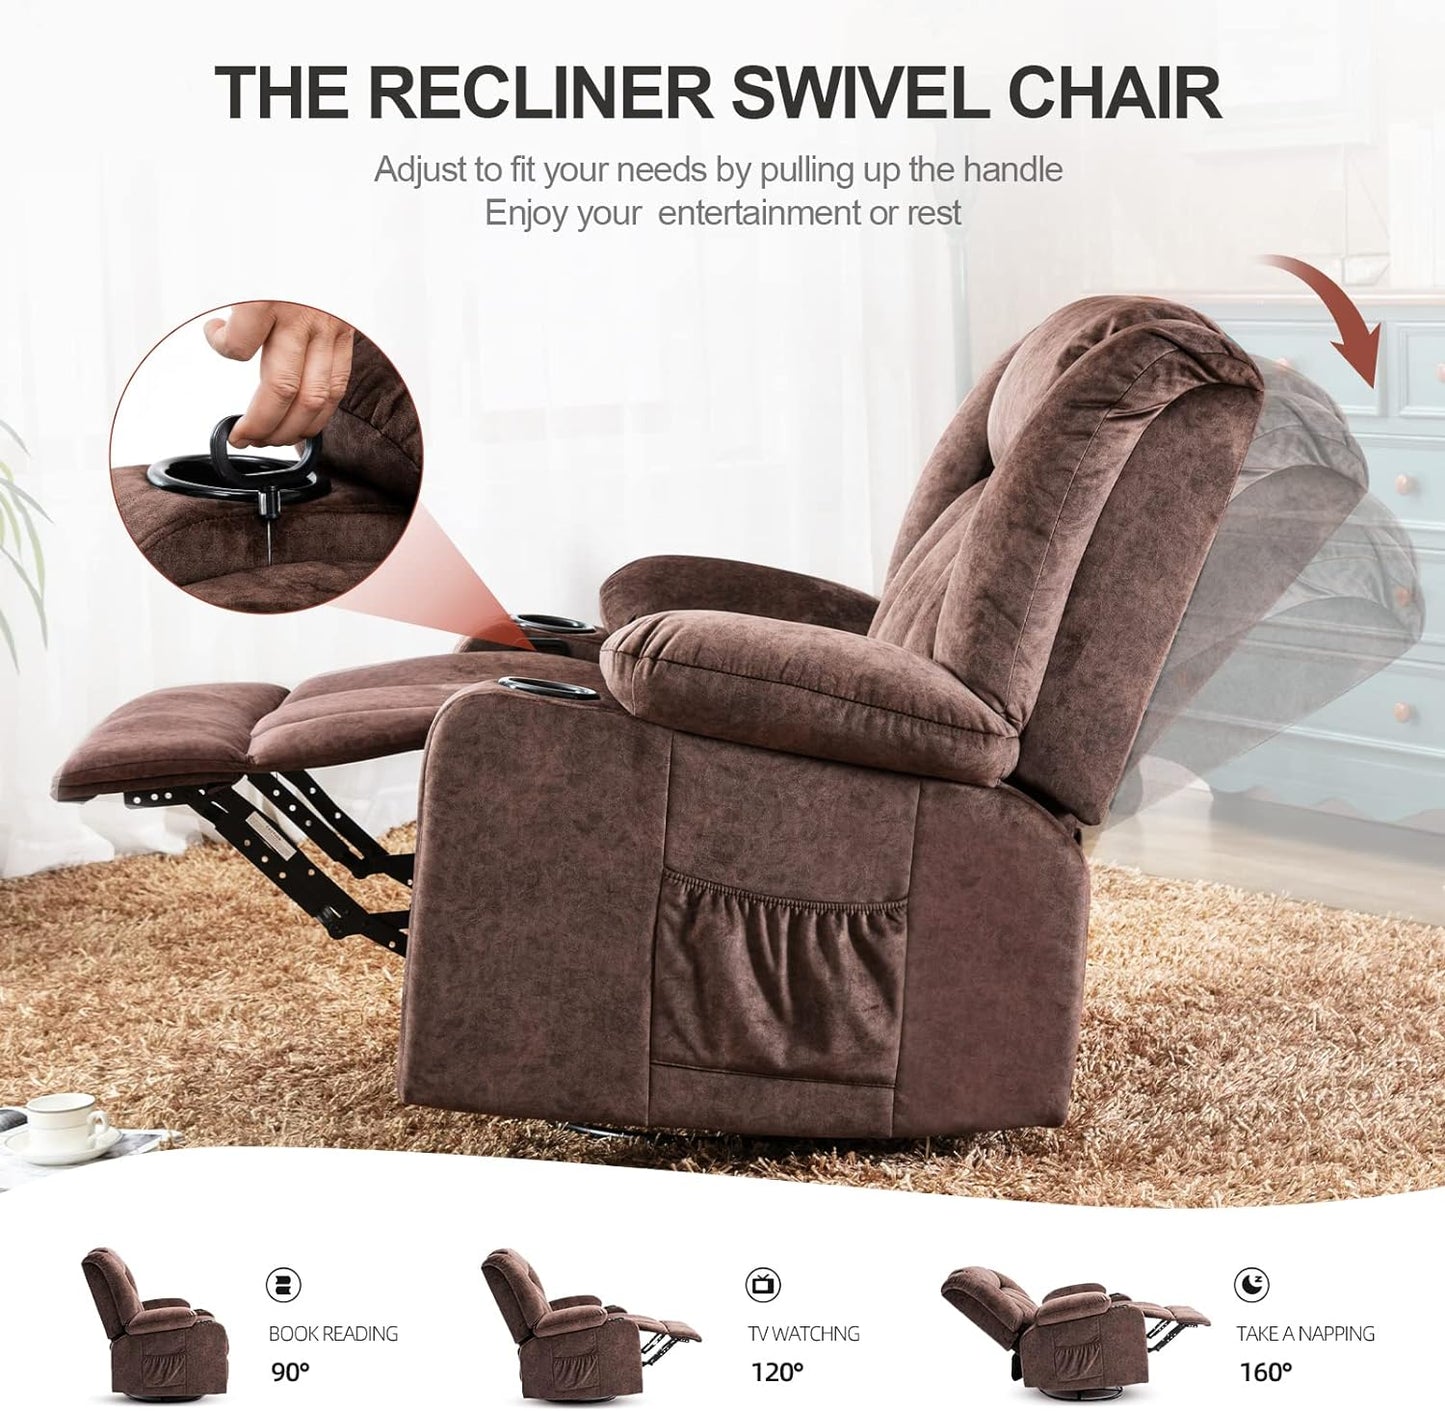 NEW - COMHOMA Recliner Chair Massage Rocker with Heated 360 Degree Swivel Lazy Boy Recliner Single Sofa Seat with Cup Holders for Living Room (brown) - Retail $289